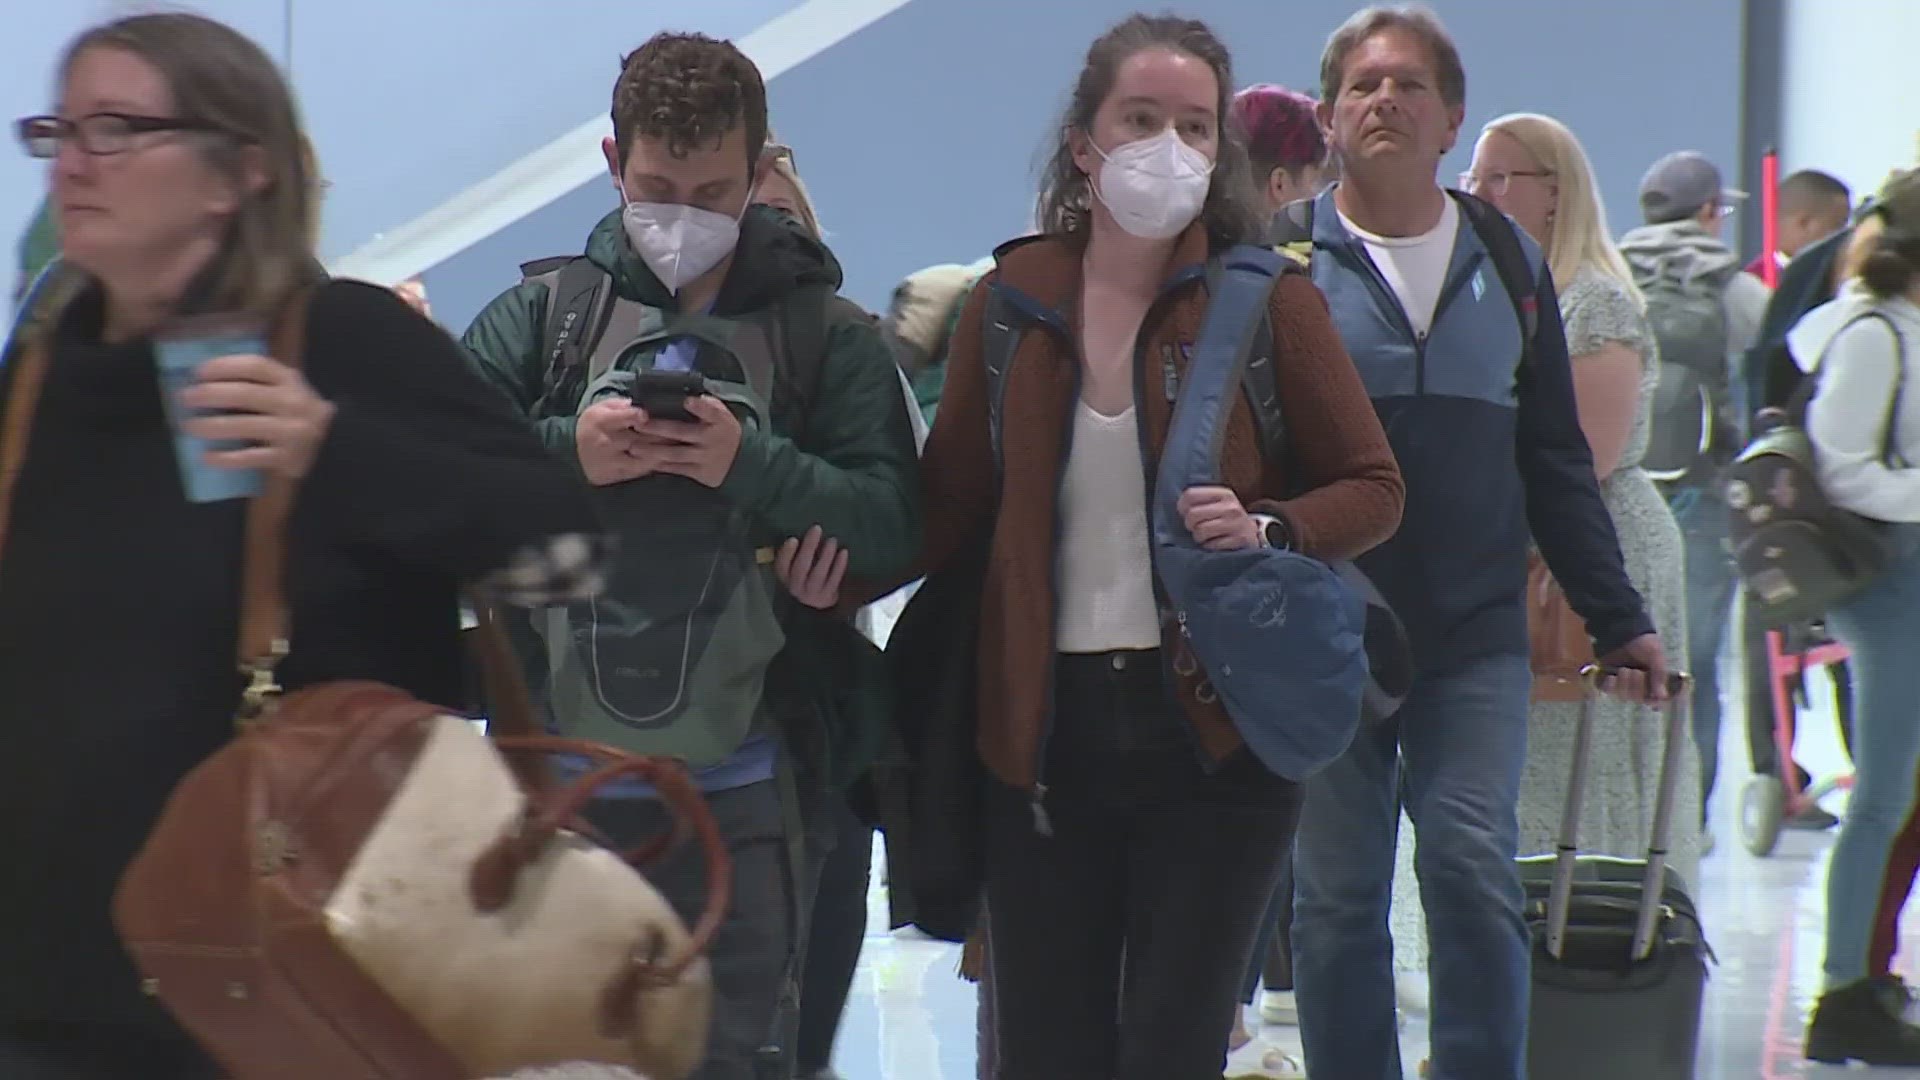 More than 400,000 passengers are expected to pass through Denver International Airport over the holiday weekend.